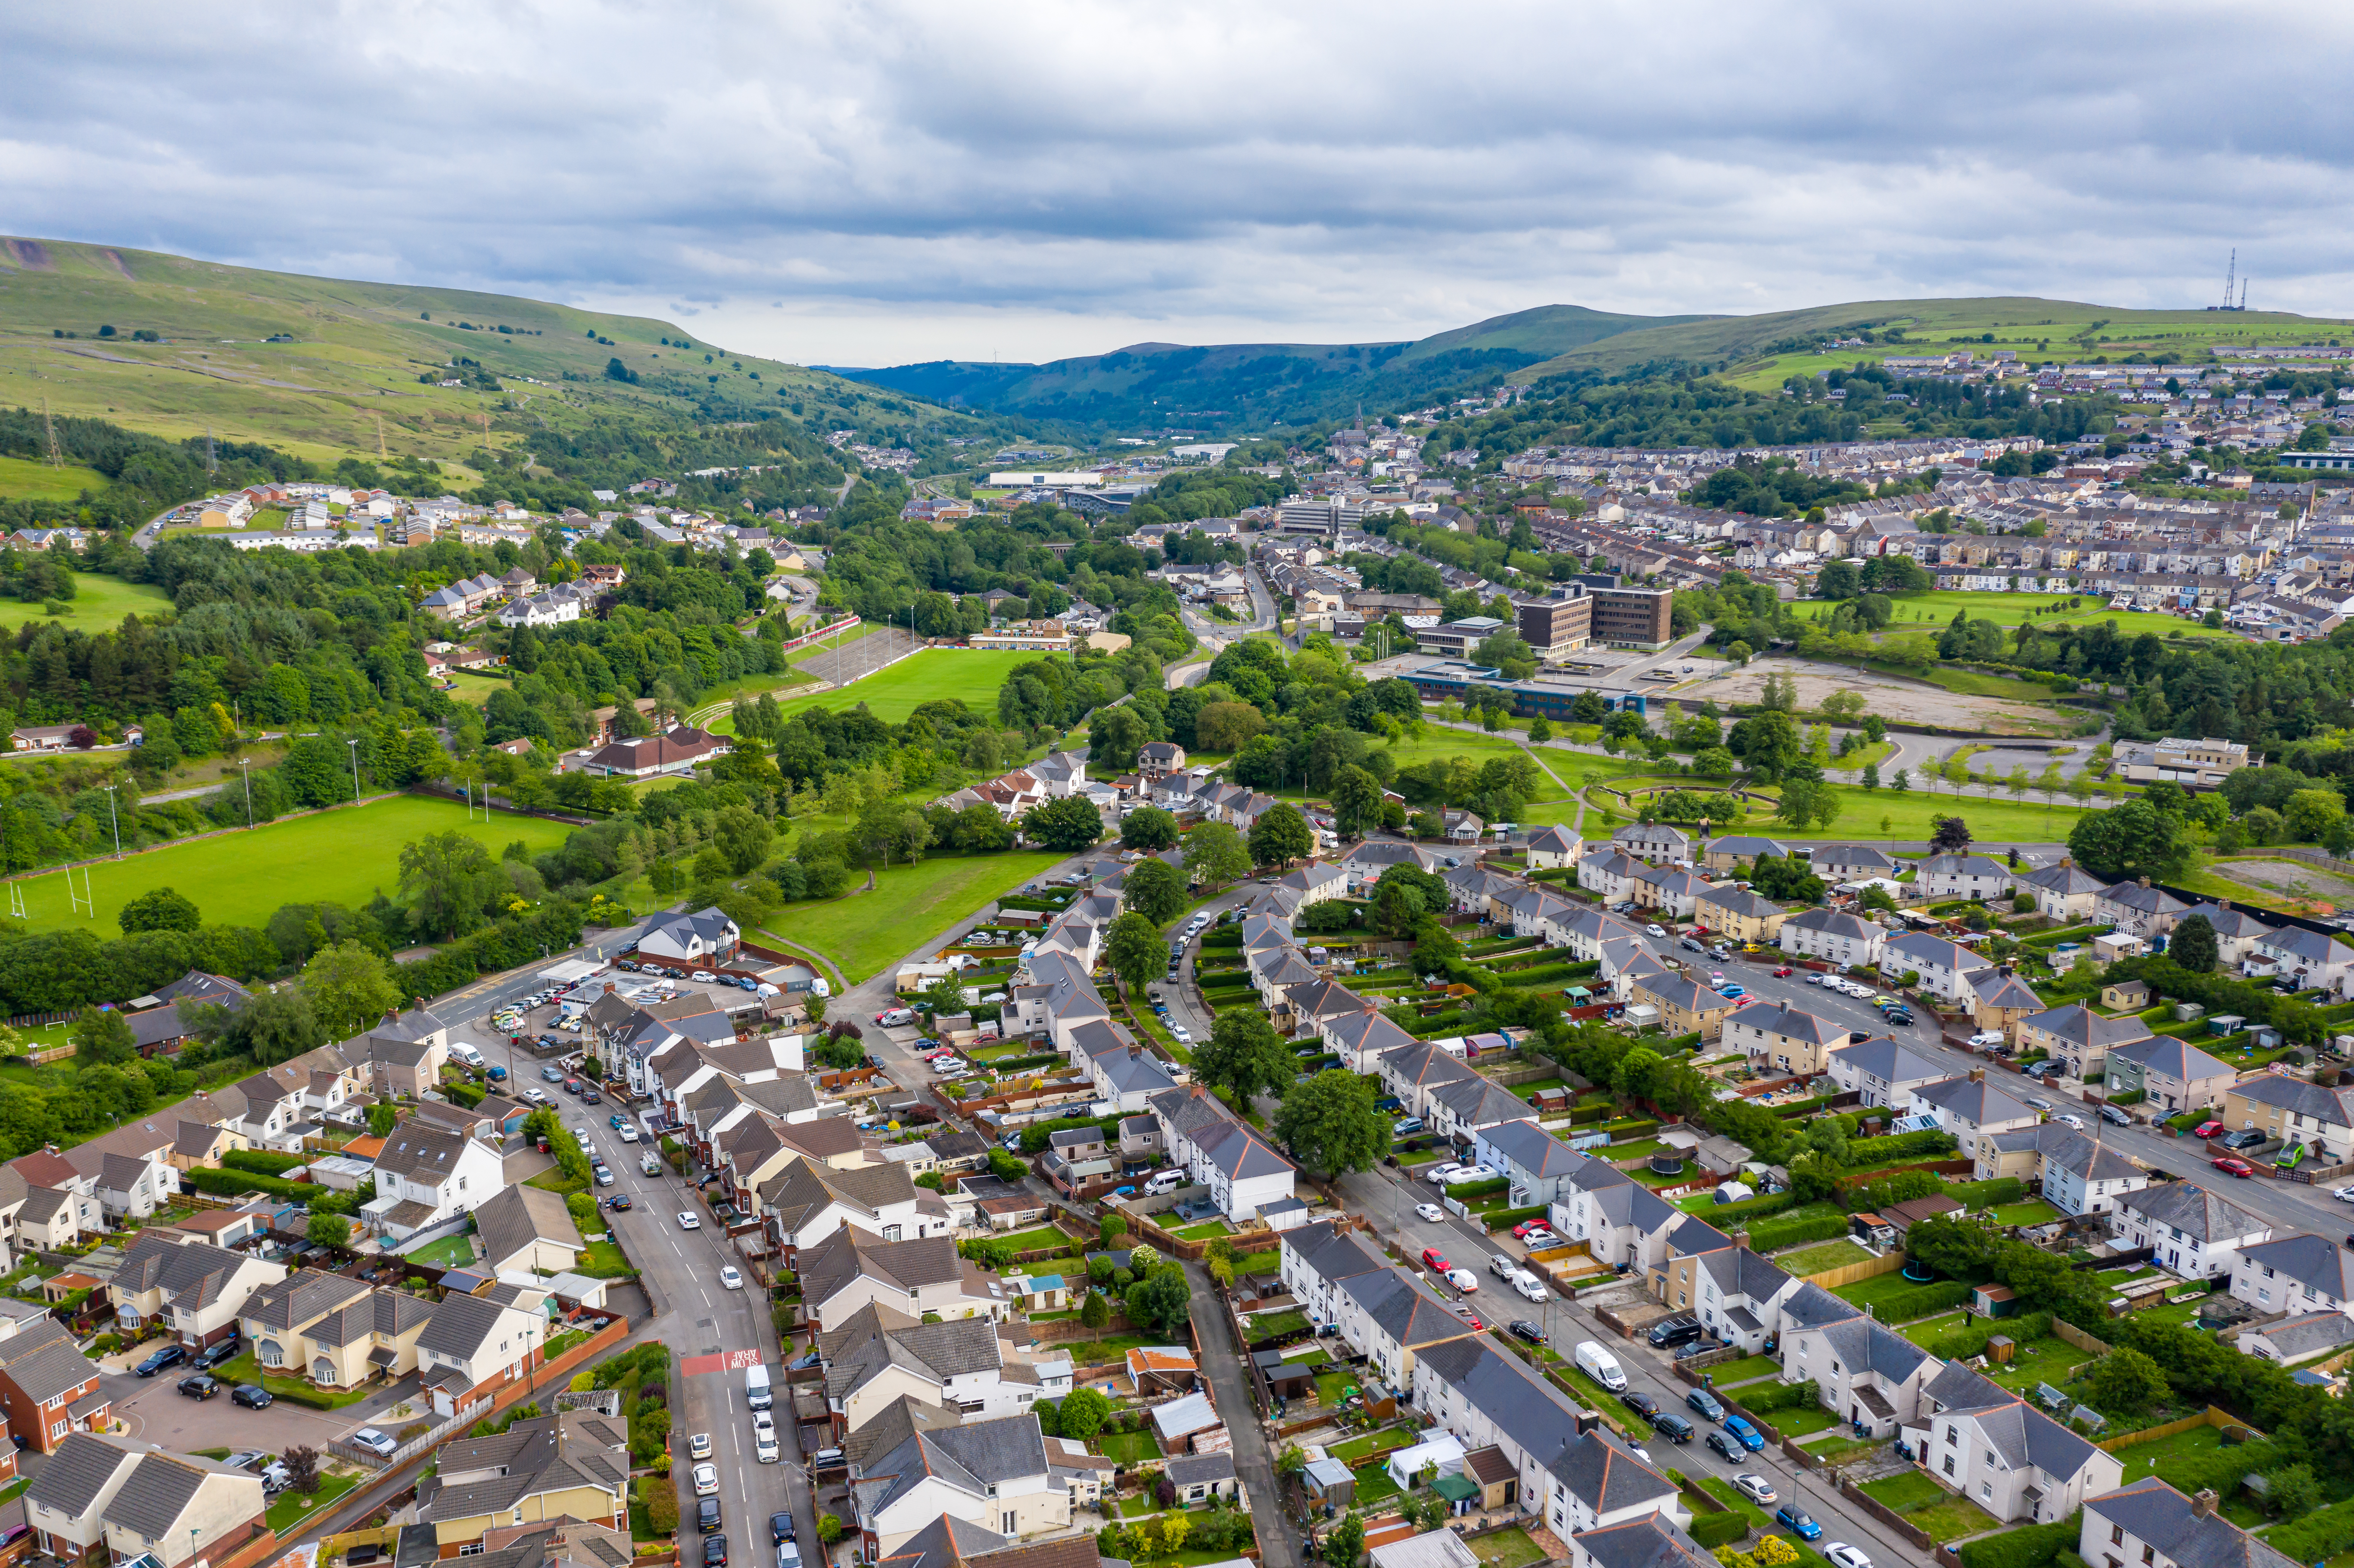 An aerial view of a neighborhood with green hills and agricultural lands in the distance. Photo by iStock.